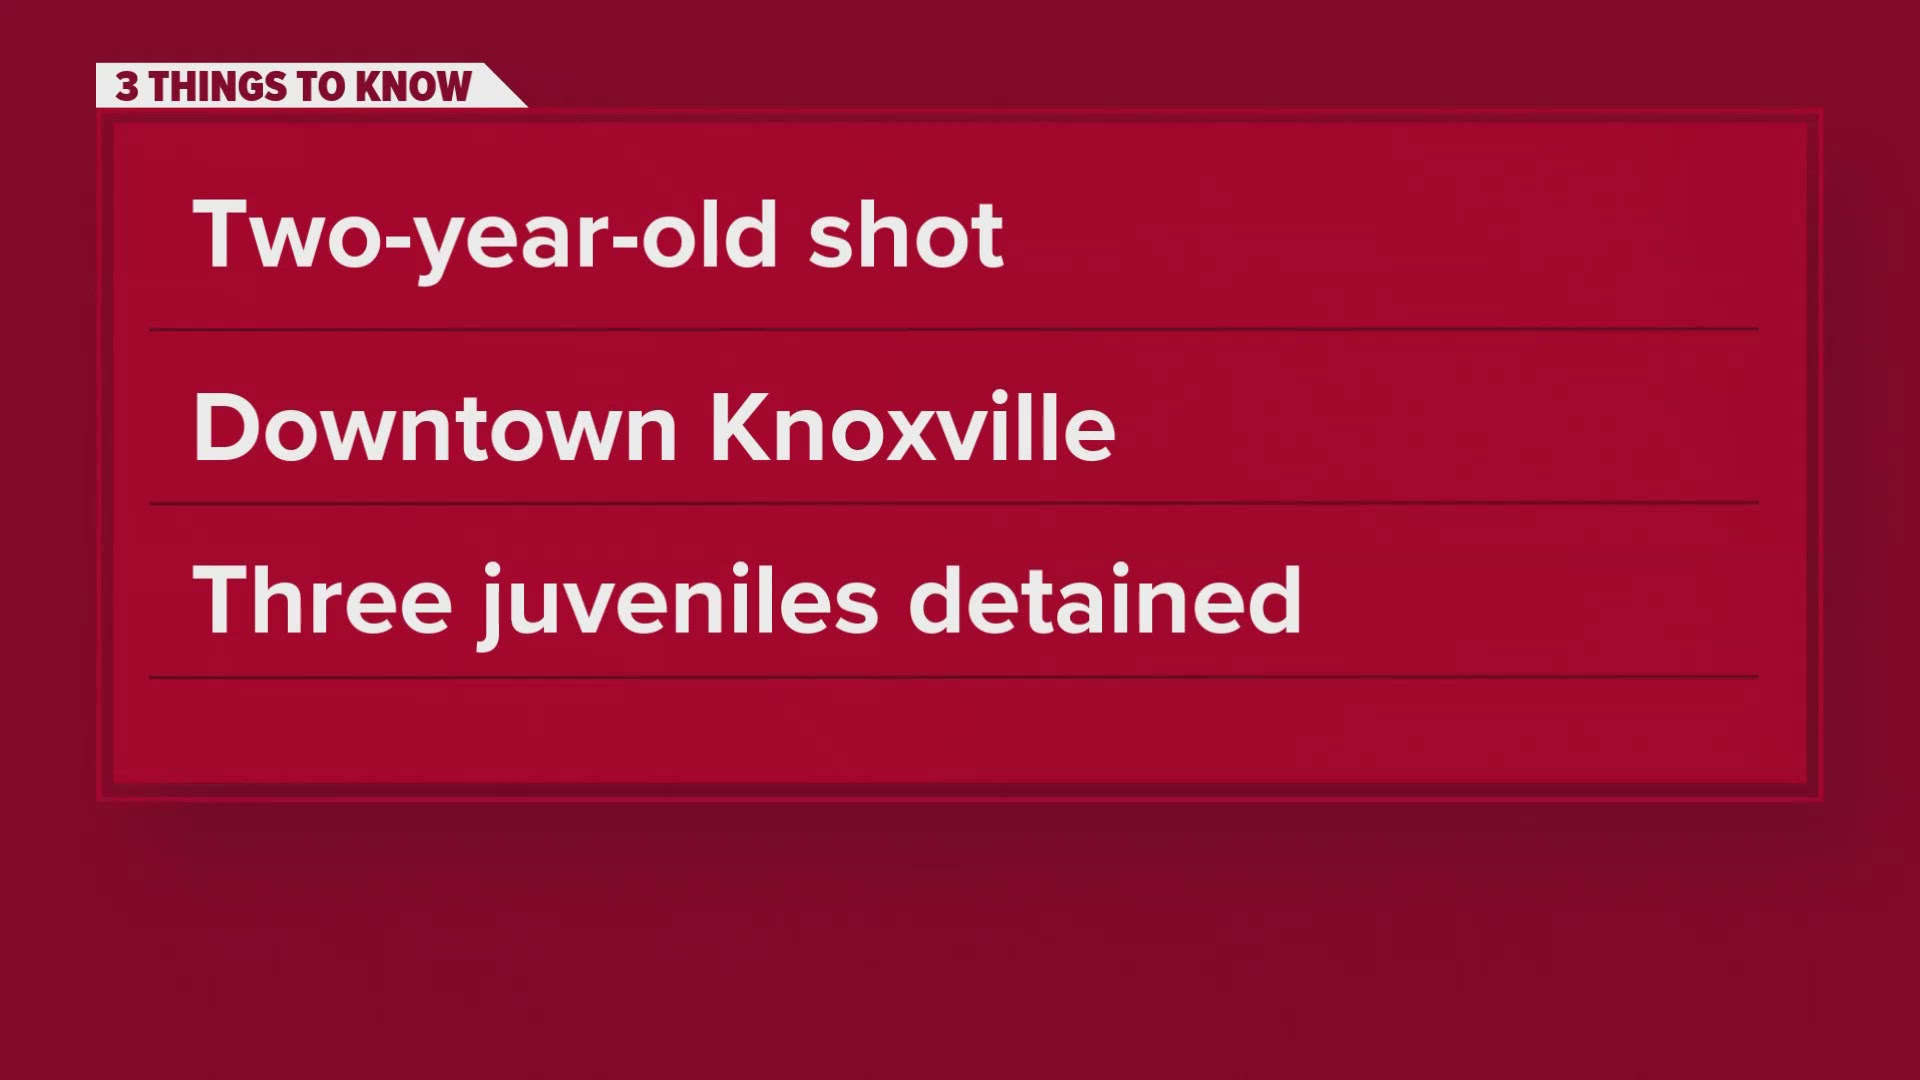 The child was transported to the hospital and is in critical condition, according to the Knoxville Police Department.